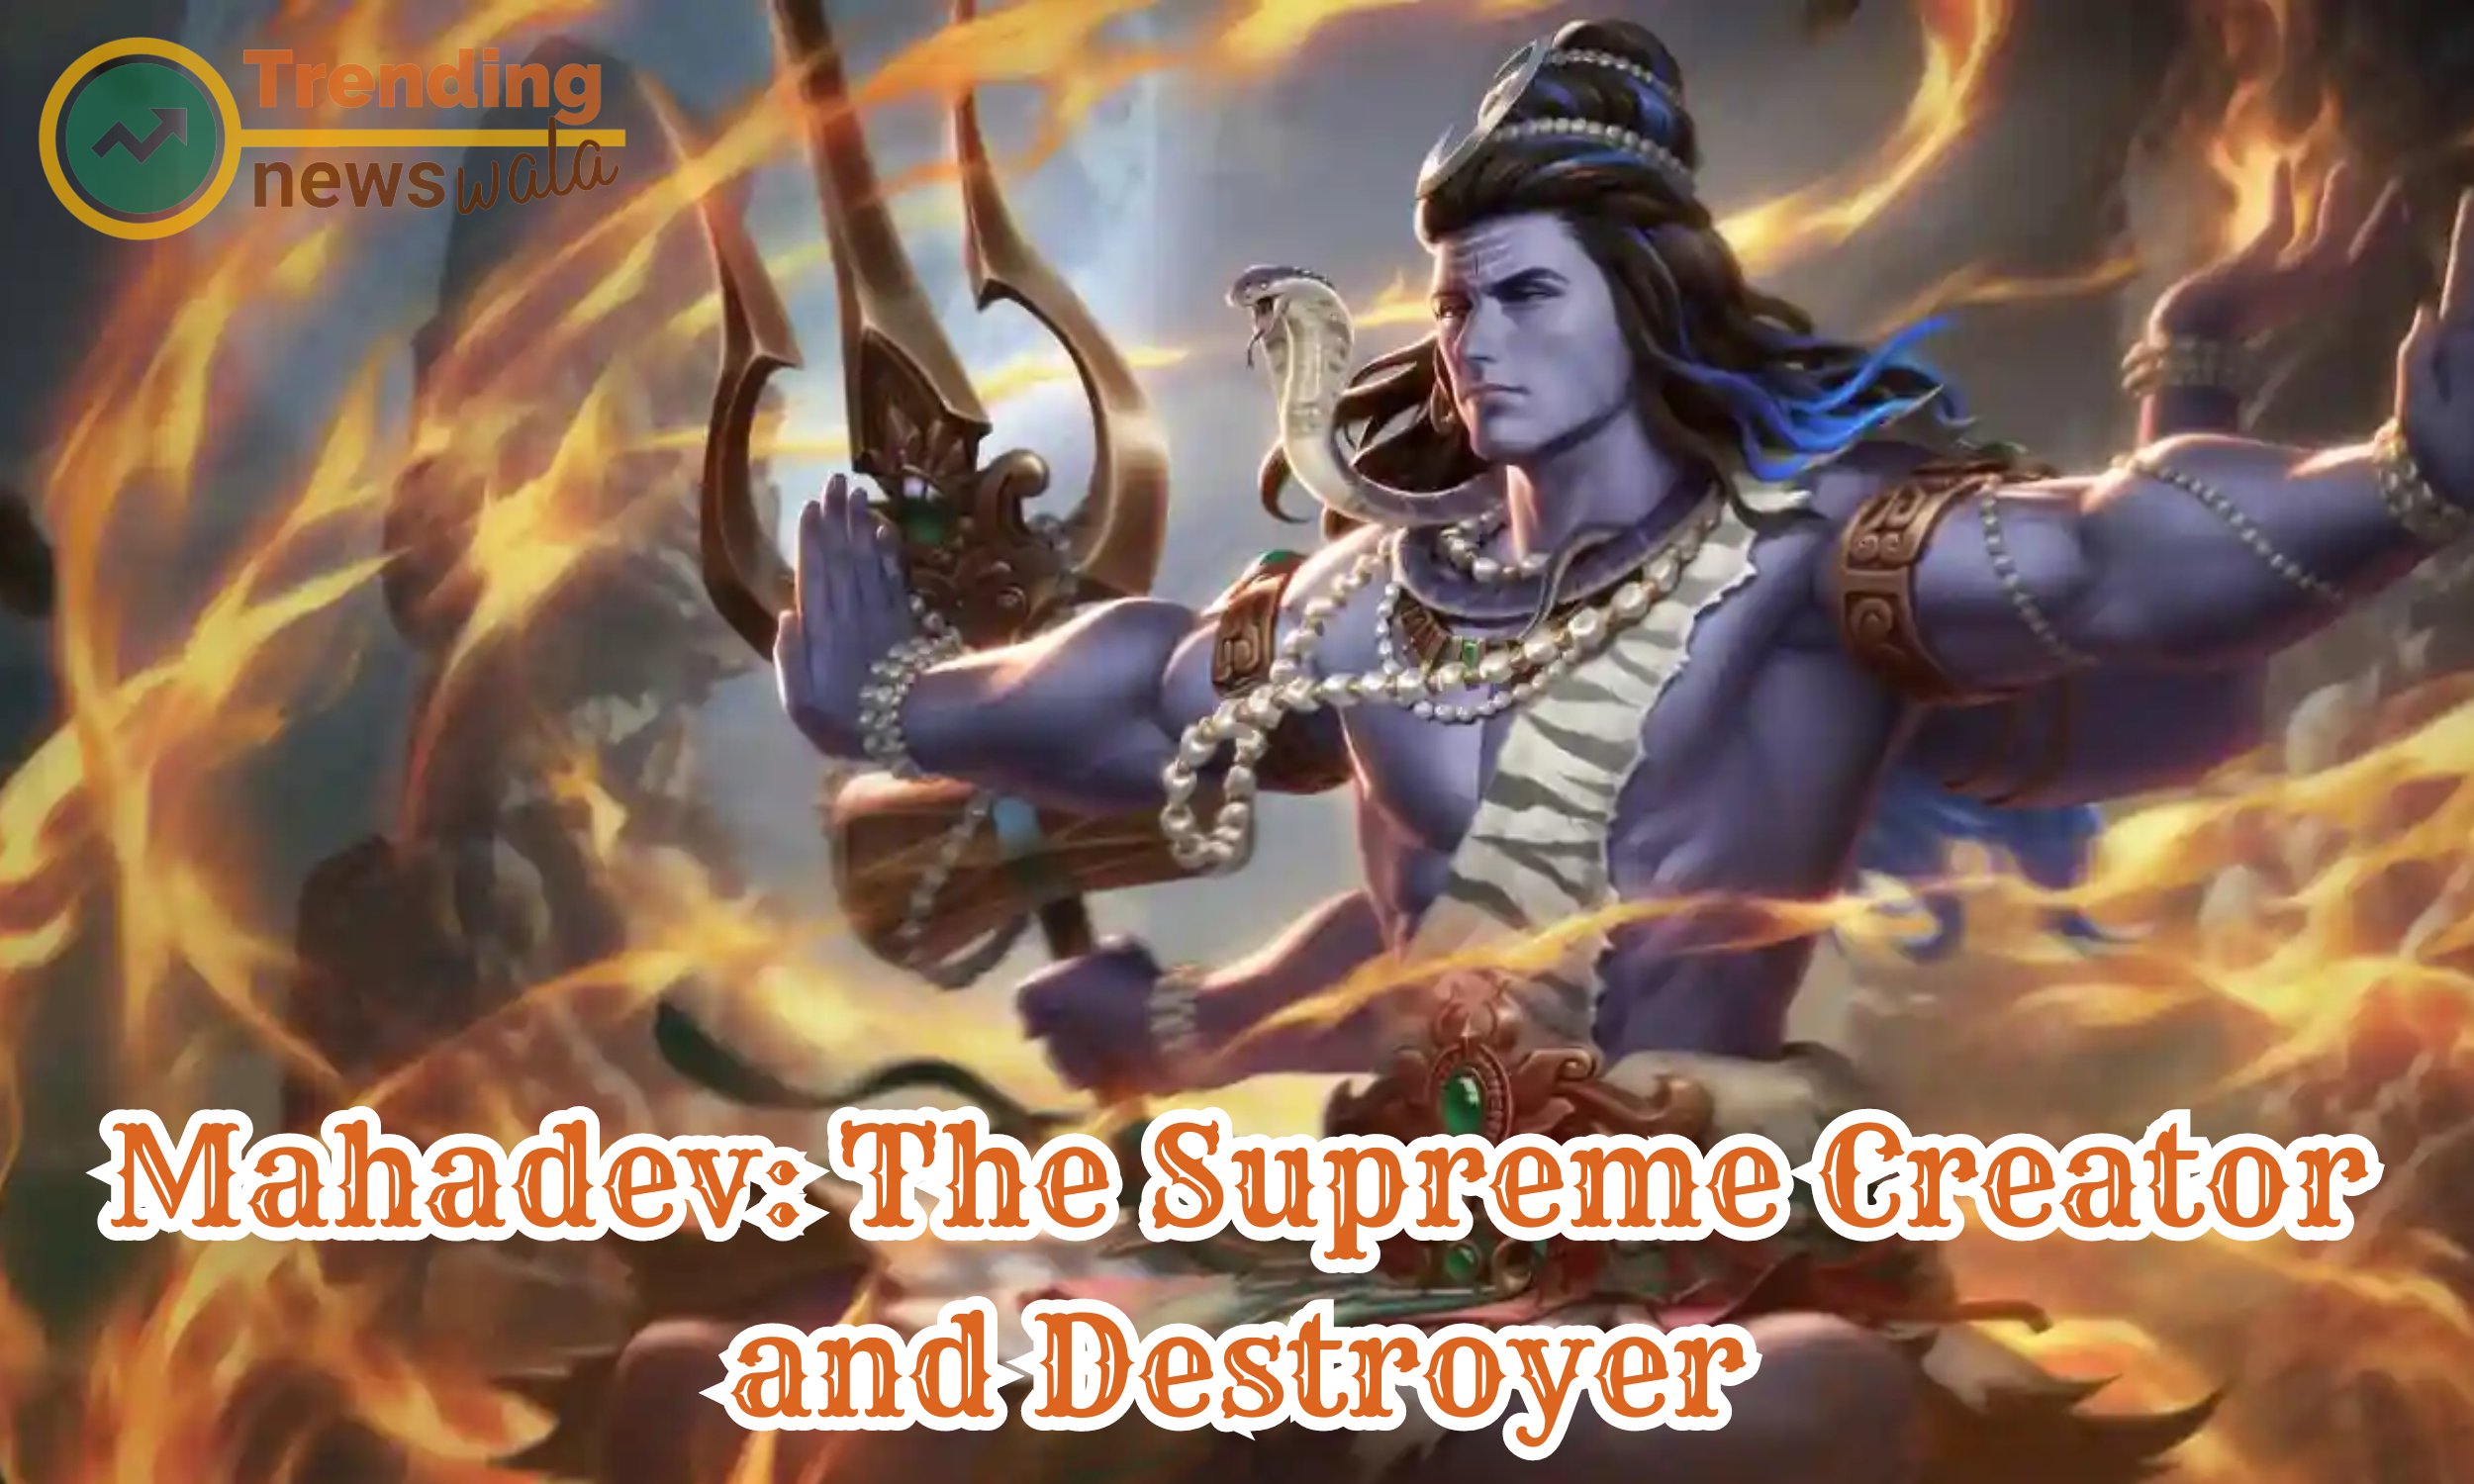 Lord Shiva as the Supreme Creator and Destroyer